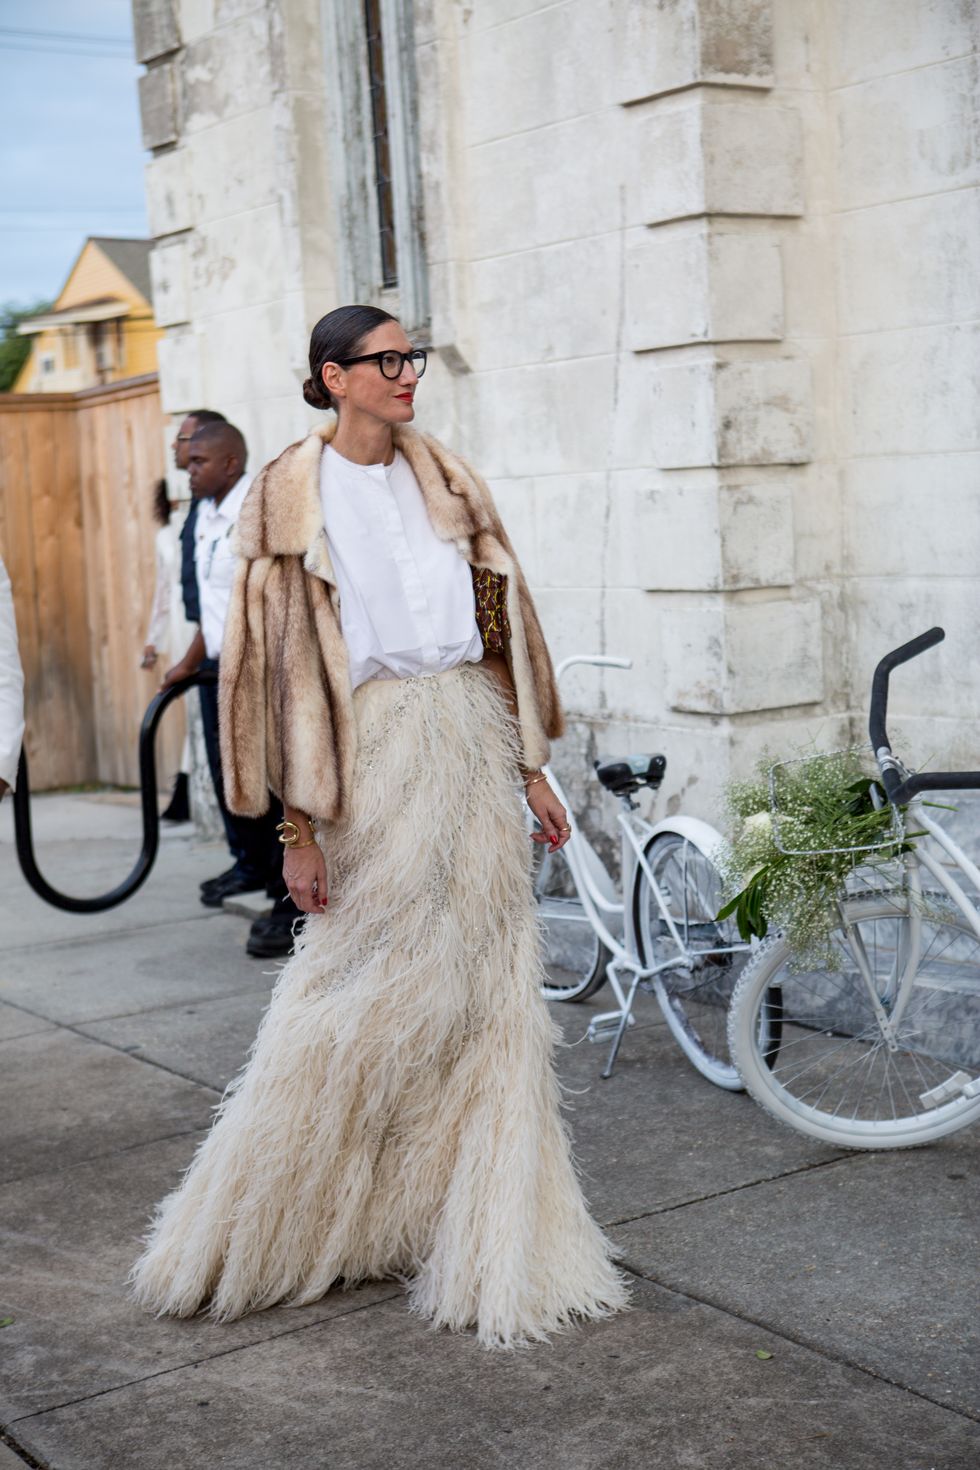 Jenna Lyons outside of the wedding ceremony of musician Solange Knowles